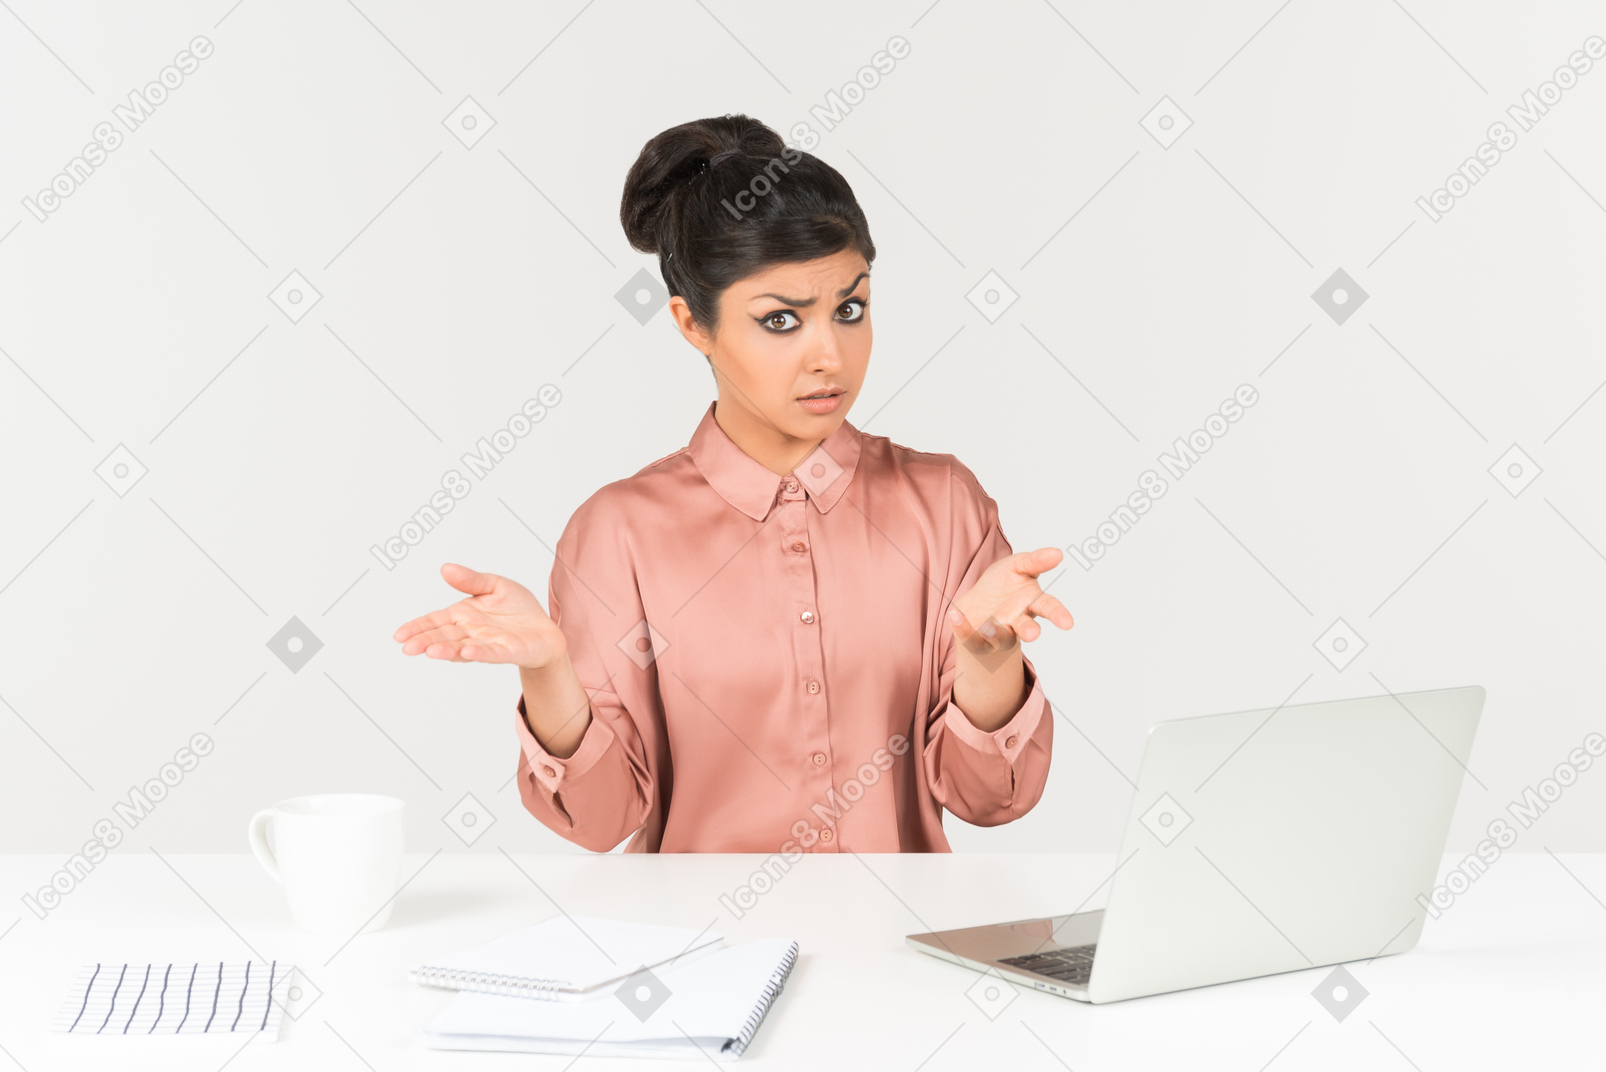 Not understanding something young indian woman sitting at the office desk